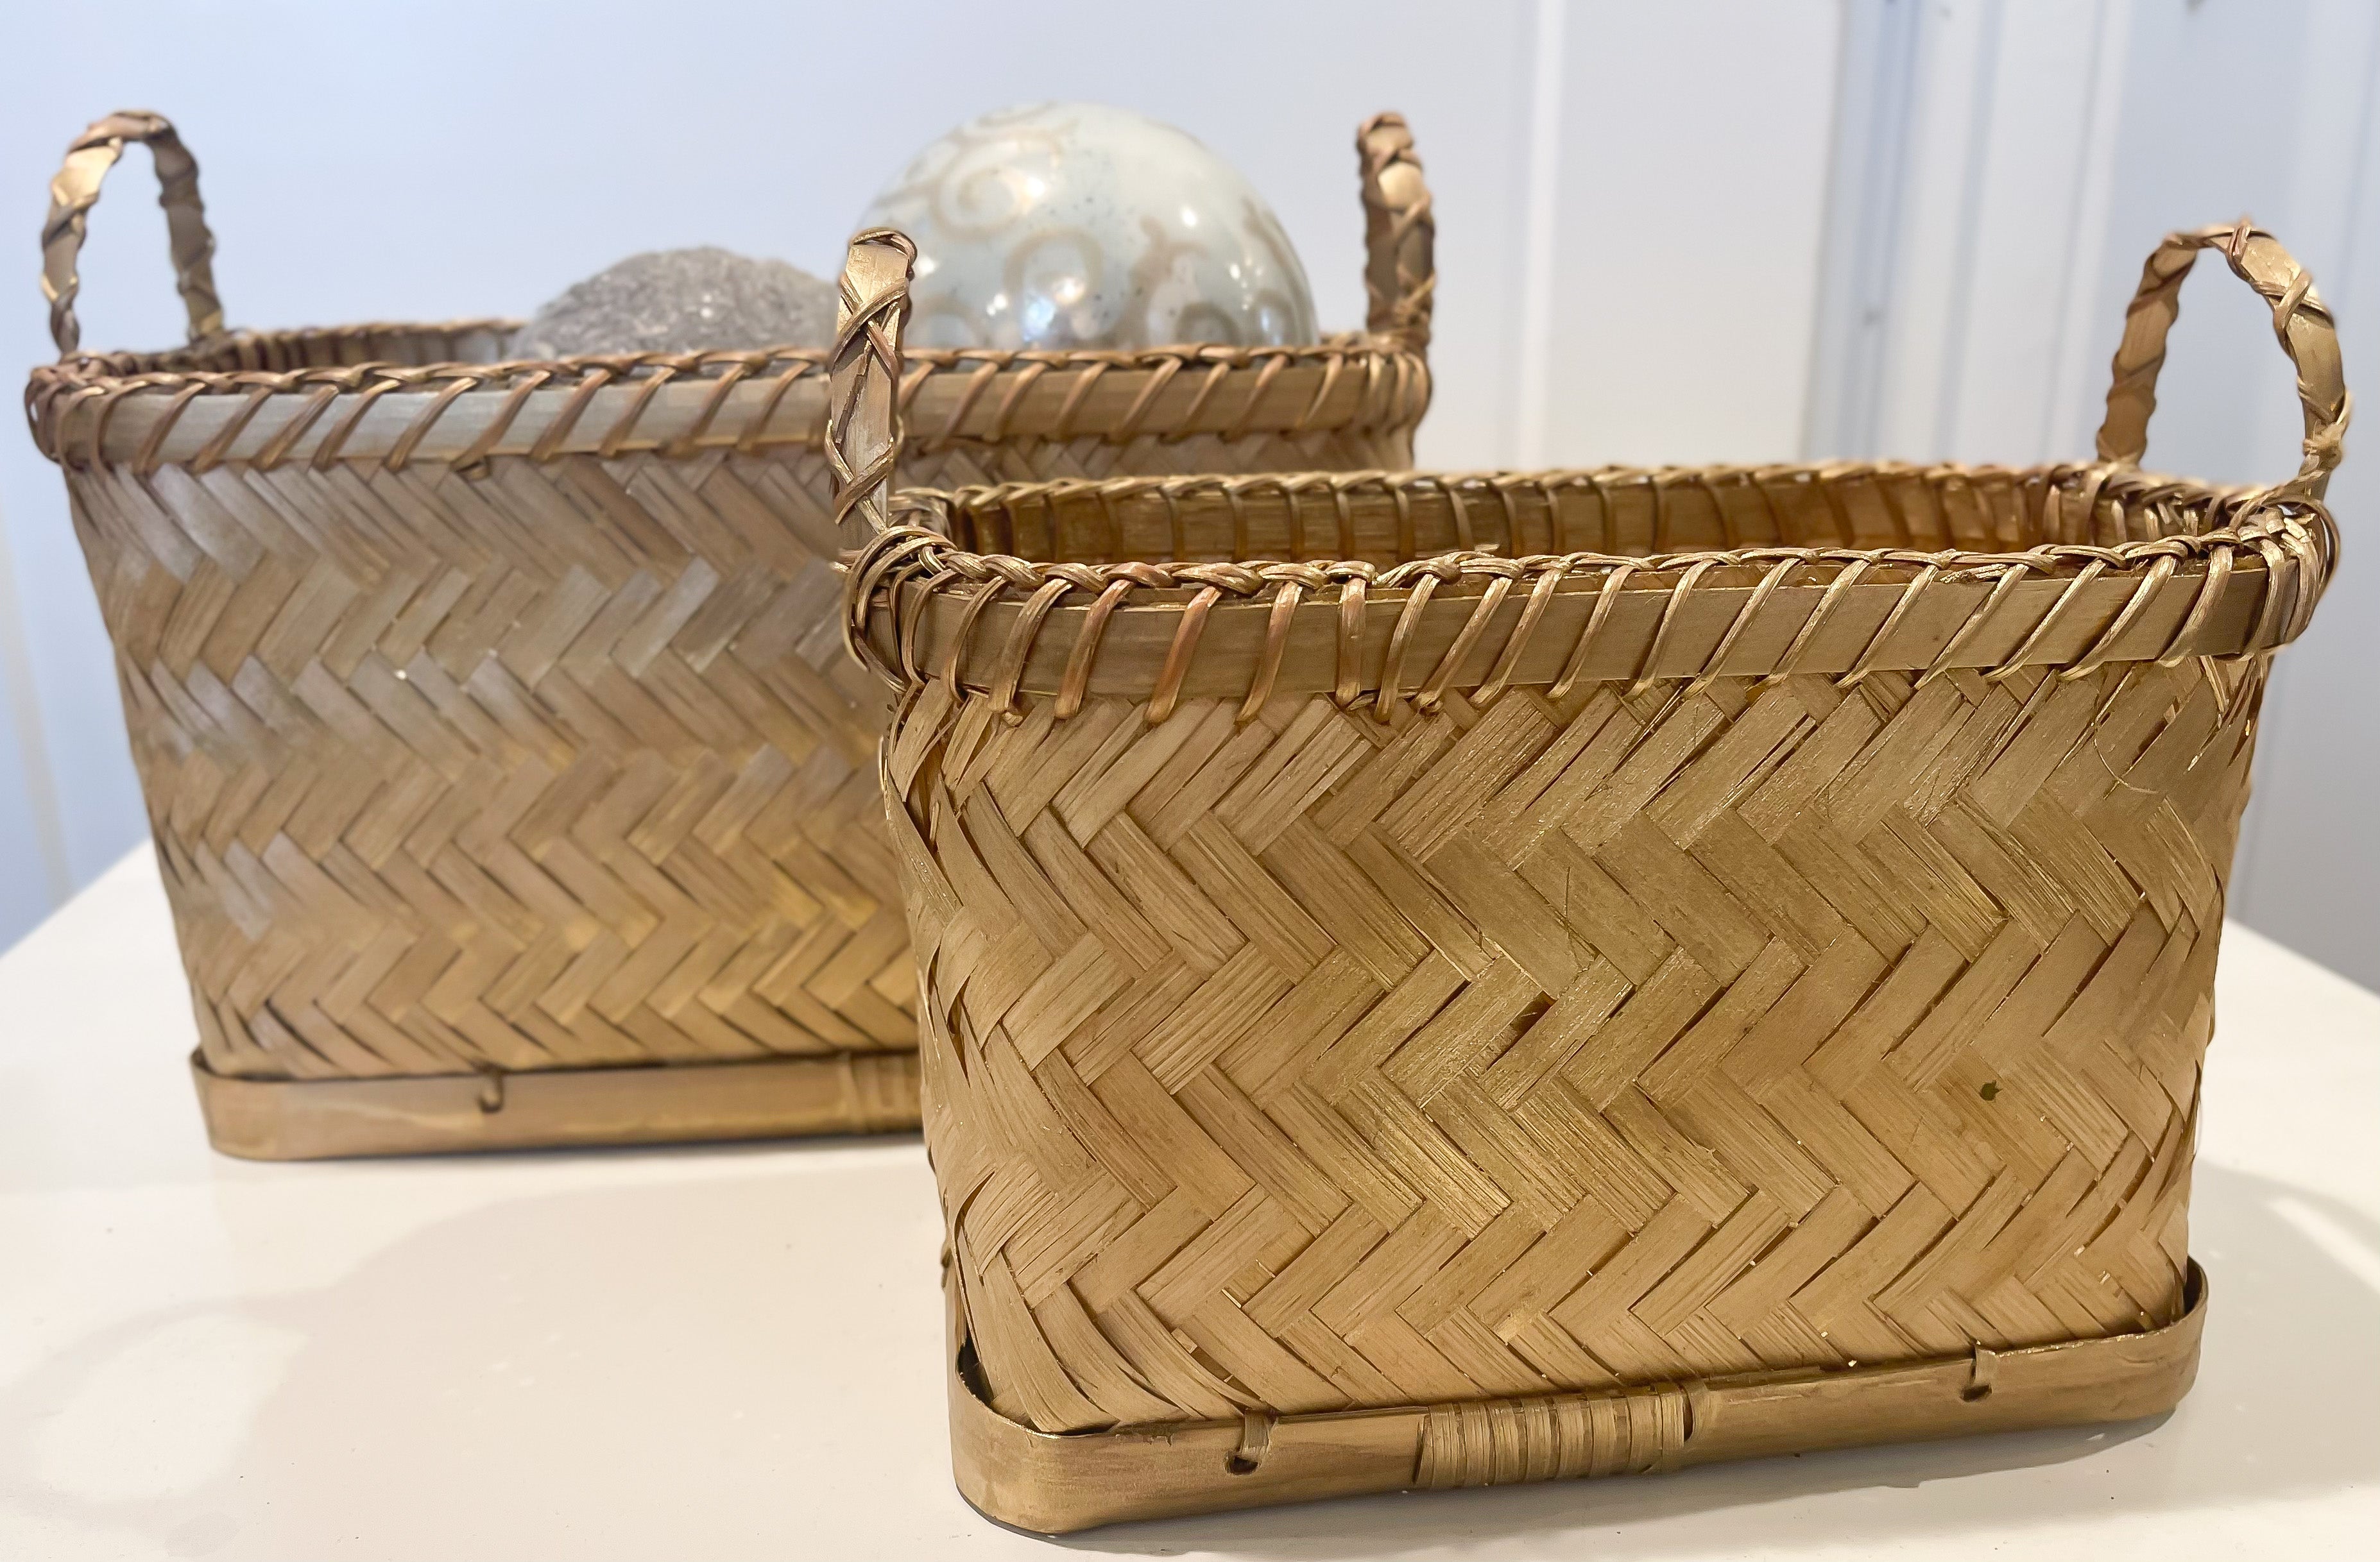 Gold Bamboo Basket with Handles